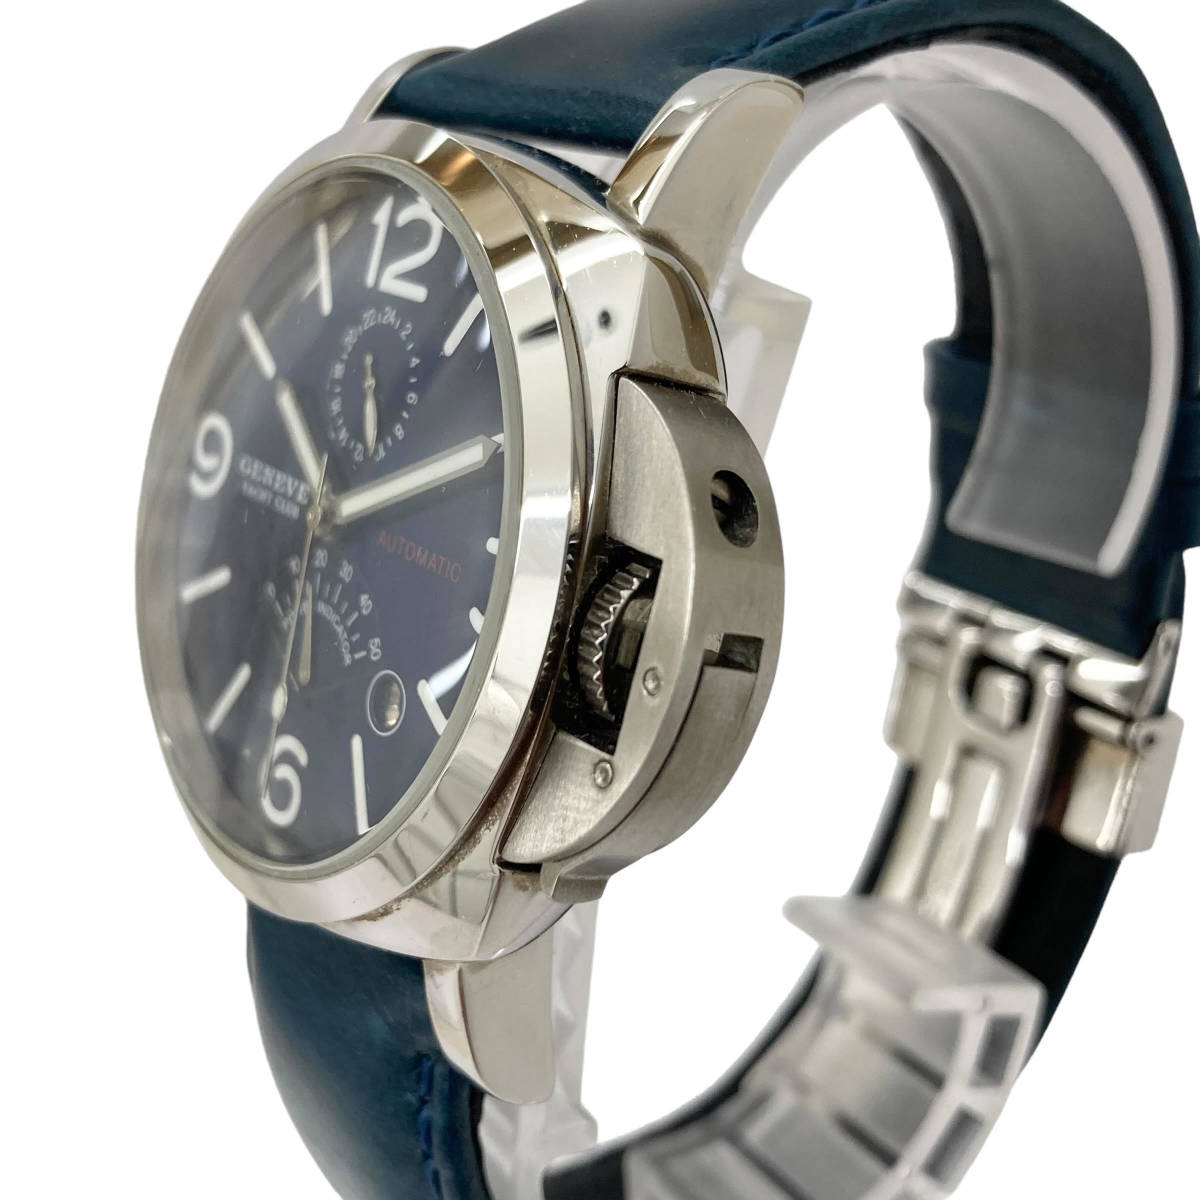 GENEVE YACHT CLUBjune-b yacht Club AT/ self-winding watch GY34-301 Date navy face APR men's wristwatch operation goods 